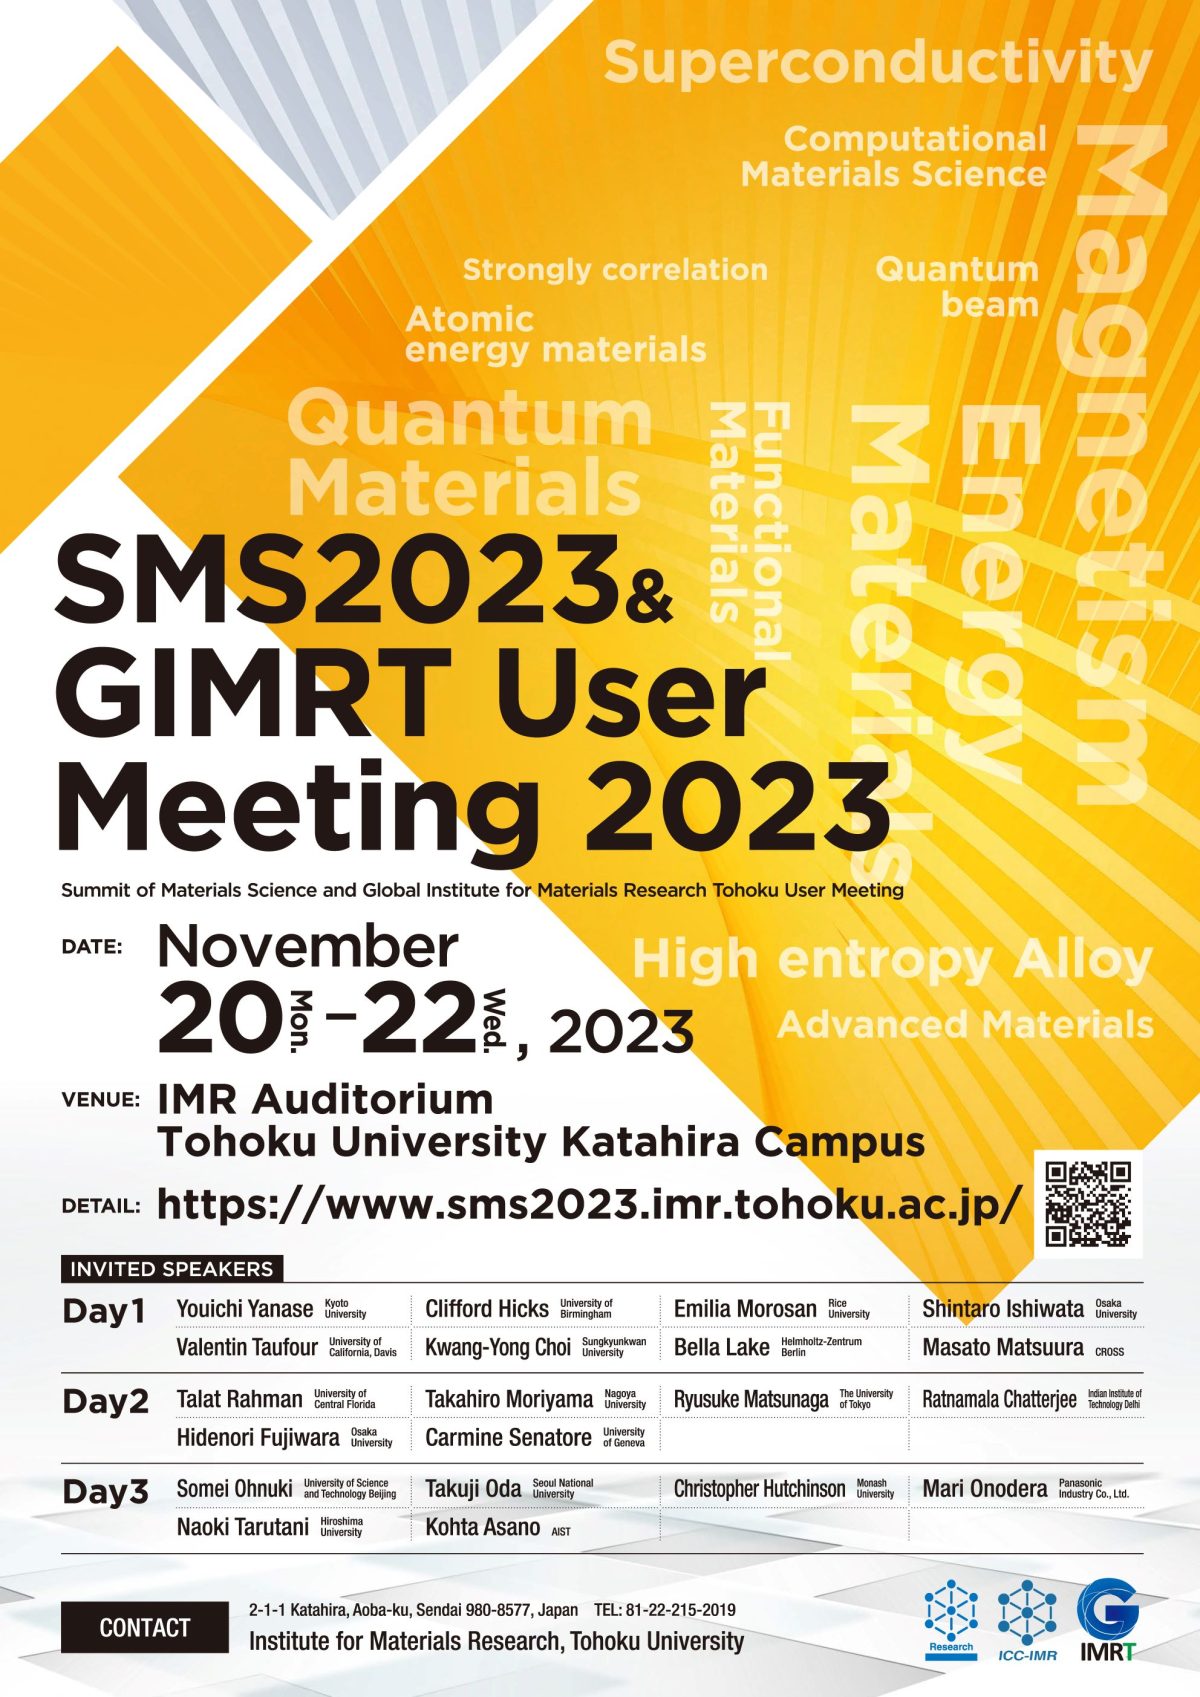 Summit of Materials Science 2023 and GIMRT User Meeting 2023（11月20日-22日開催）